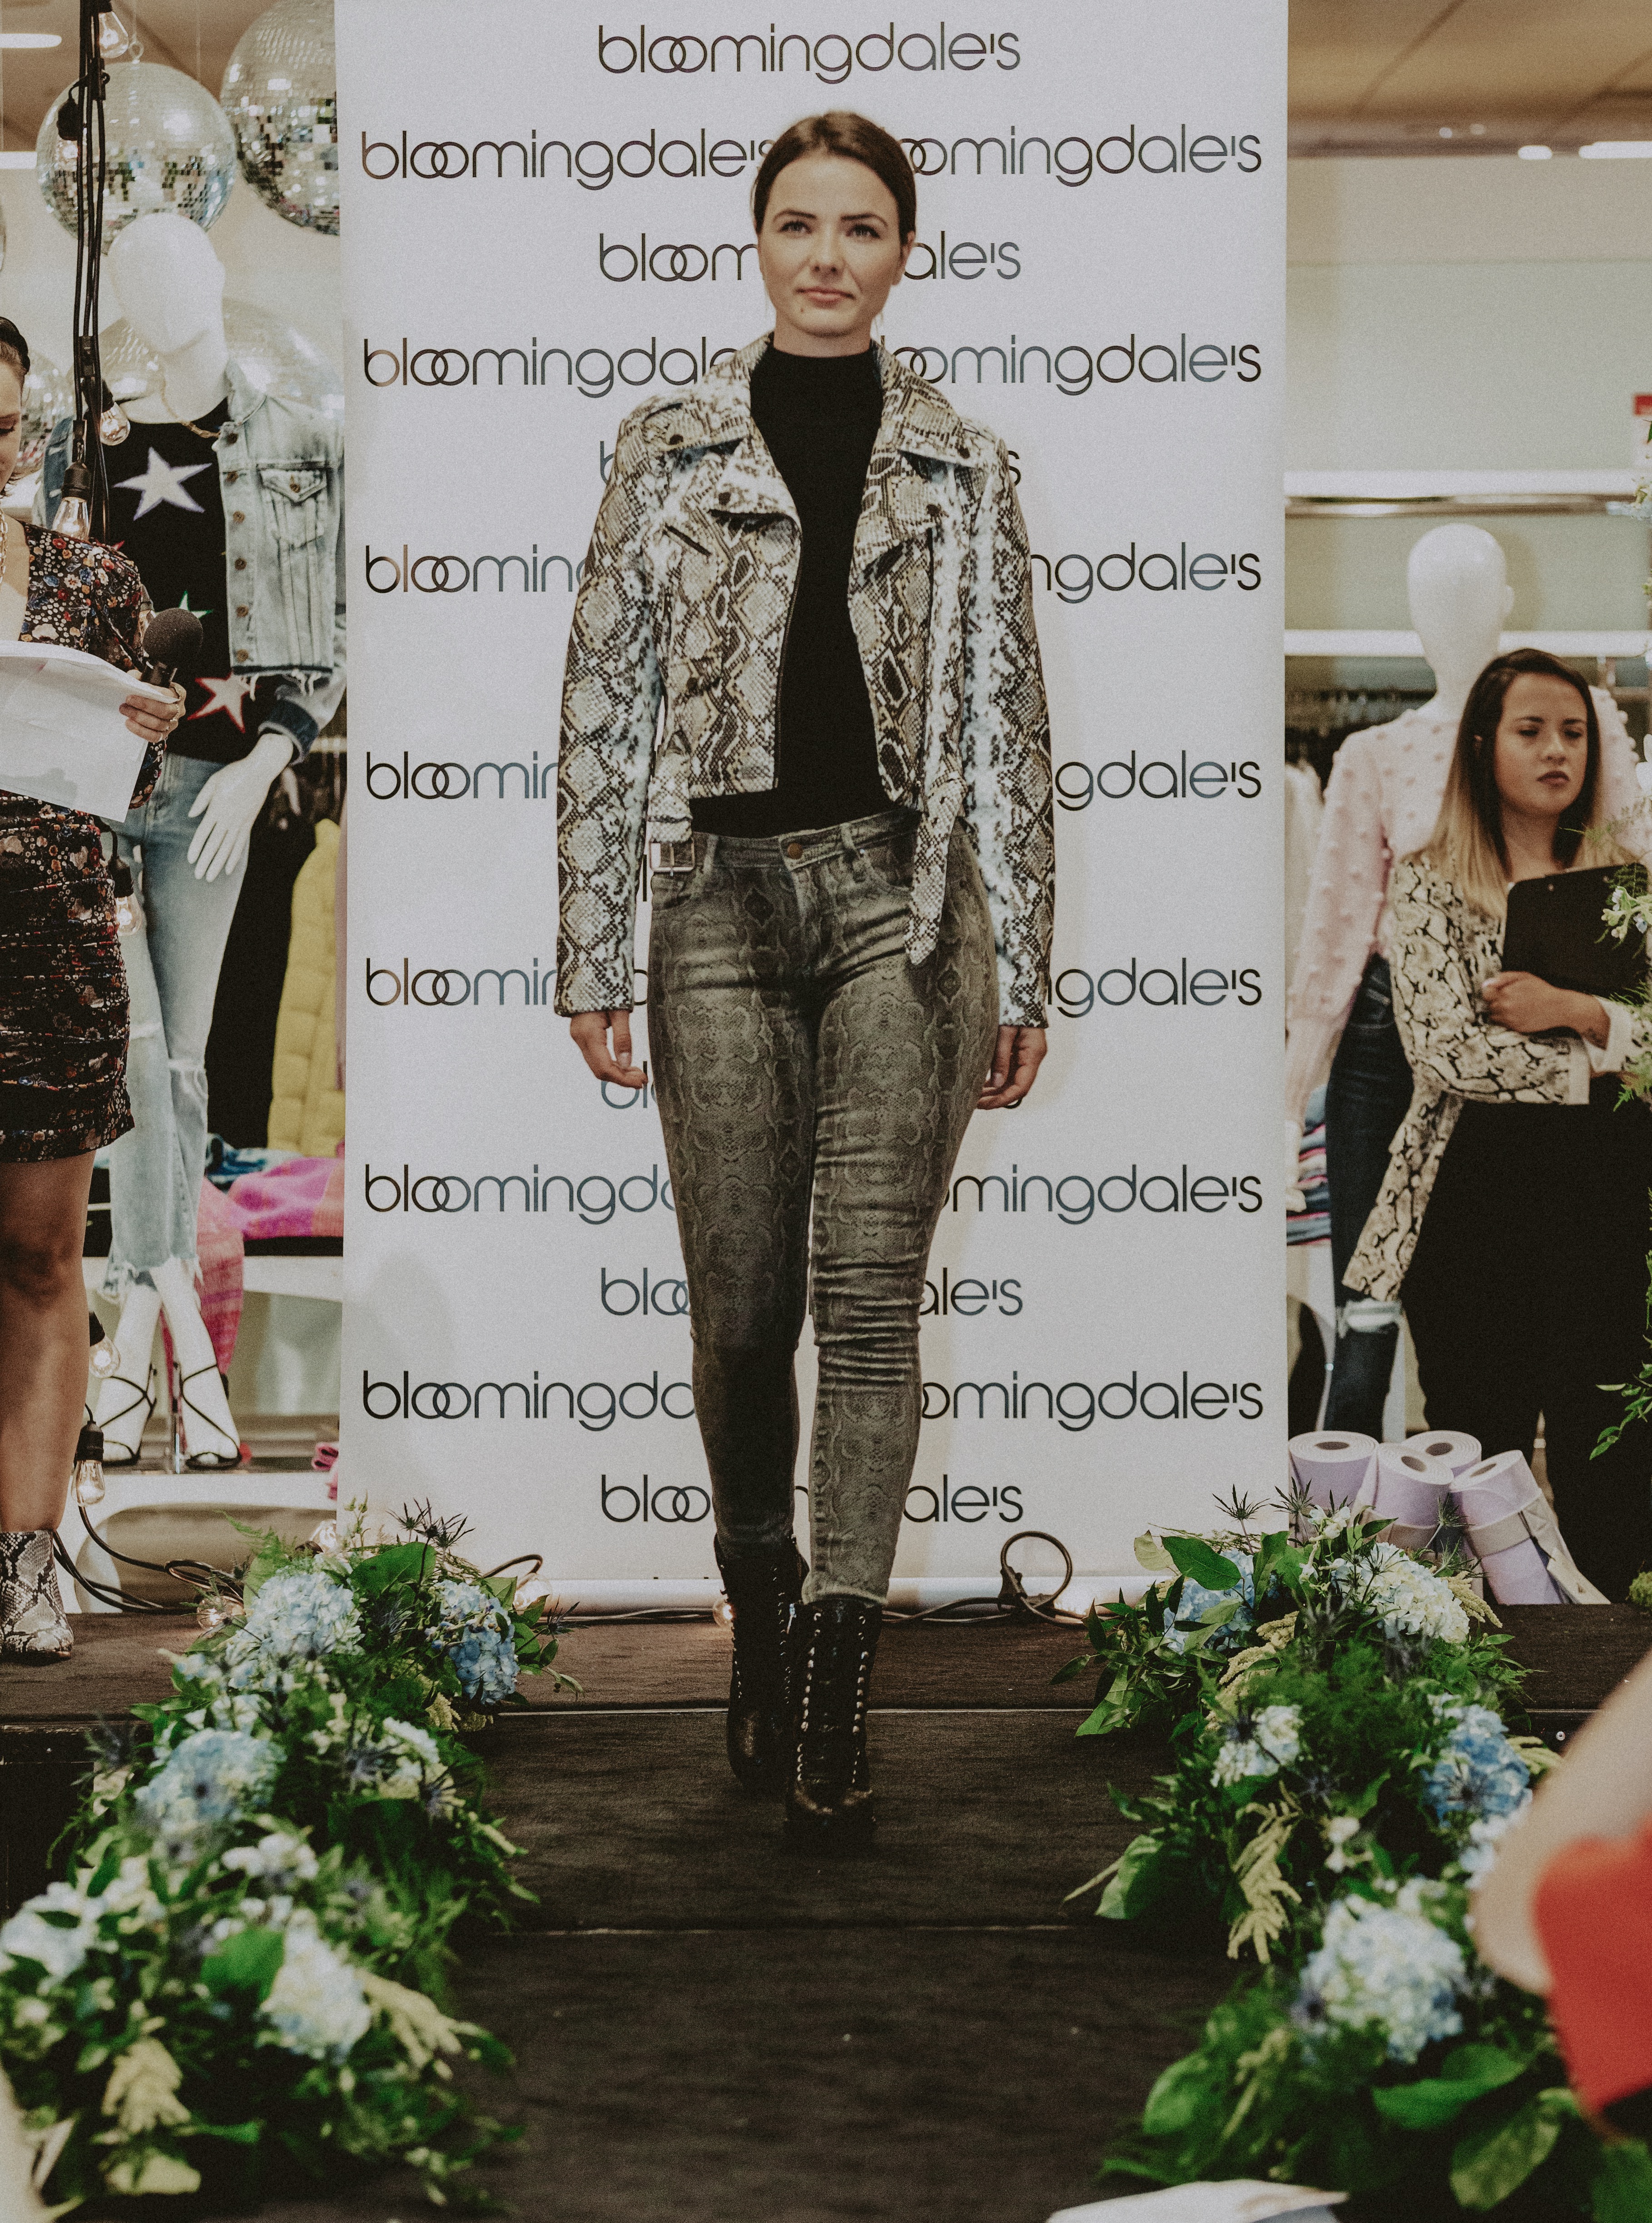 Simone Piliero - Wardrobe Envy - Tina - In Store Shop - Hosts NYFW in Westchester County at Bloomingdales White Plains Season 3 #nyfw #bloomingdales #westchestercounty #newyork #fallfashion #falloutfit #fallstyle #fashionshow #runway #runwayshow #event #bloggerstyle #fashion #outfit #style #styleinspiration #model 